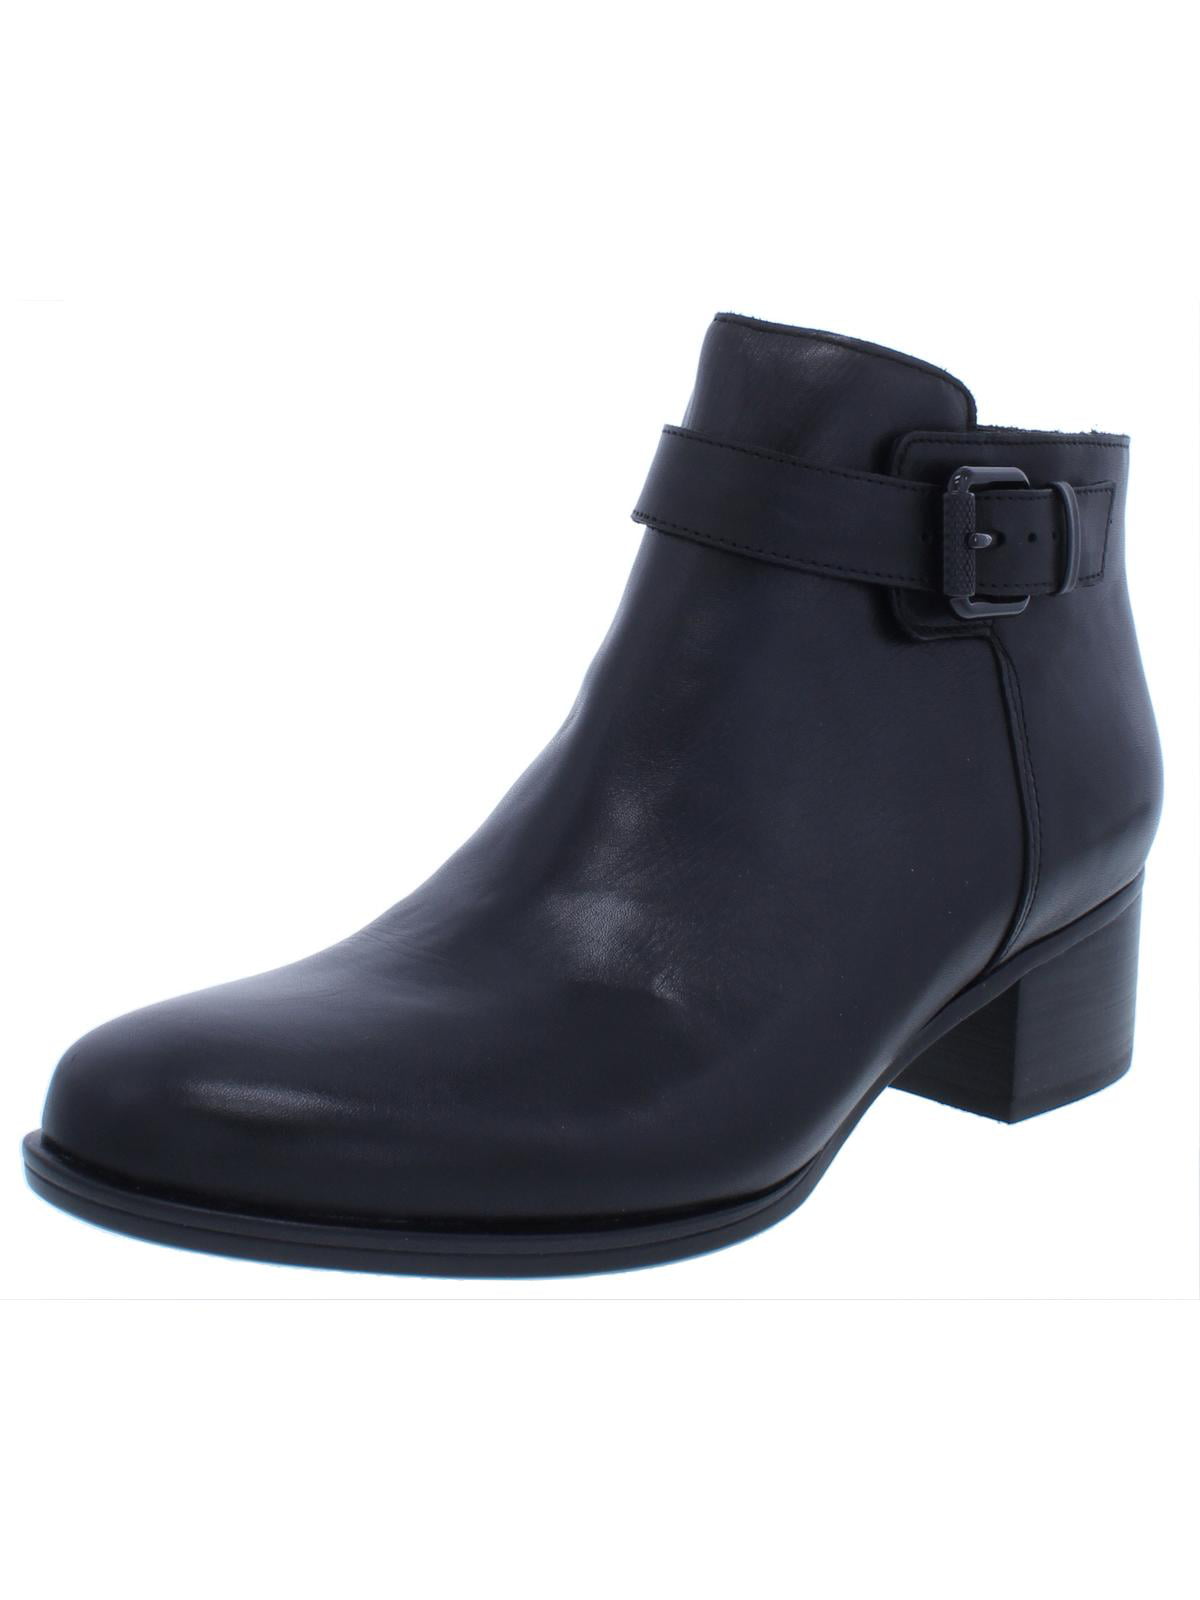 Naturalizer Womens Dora Leather Booties 